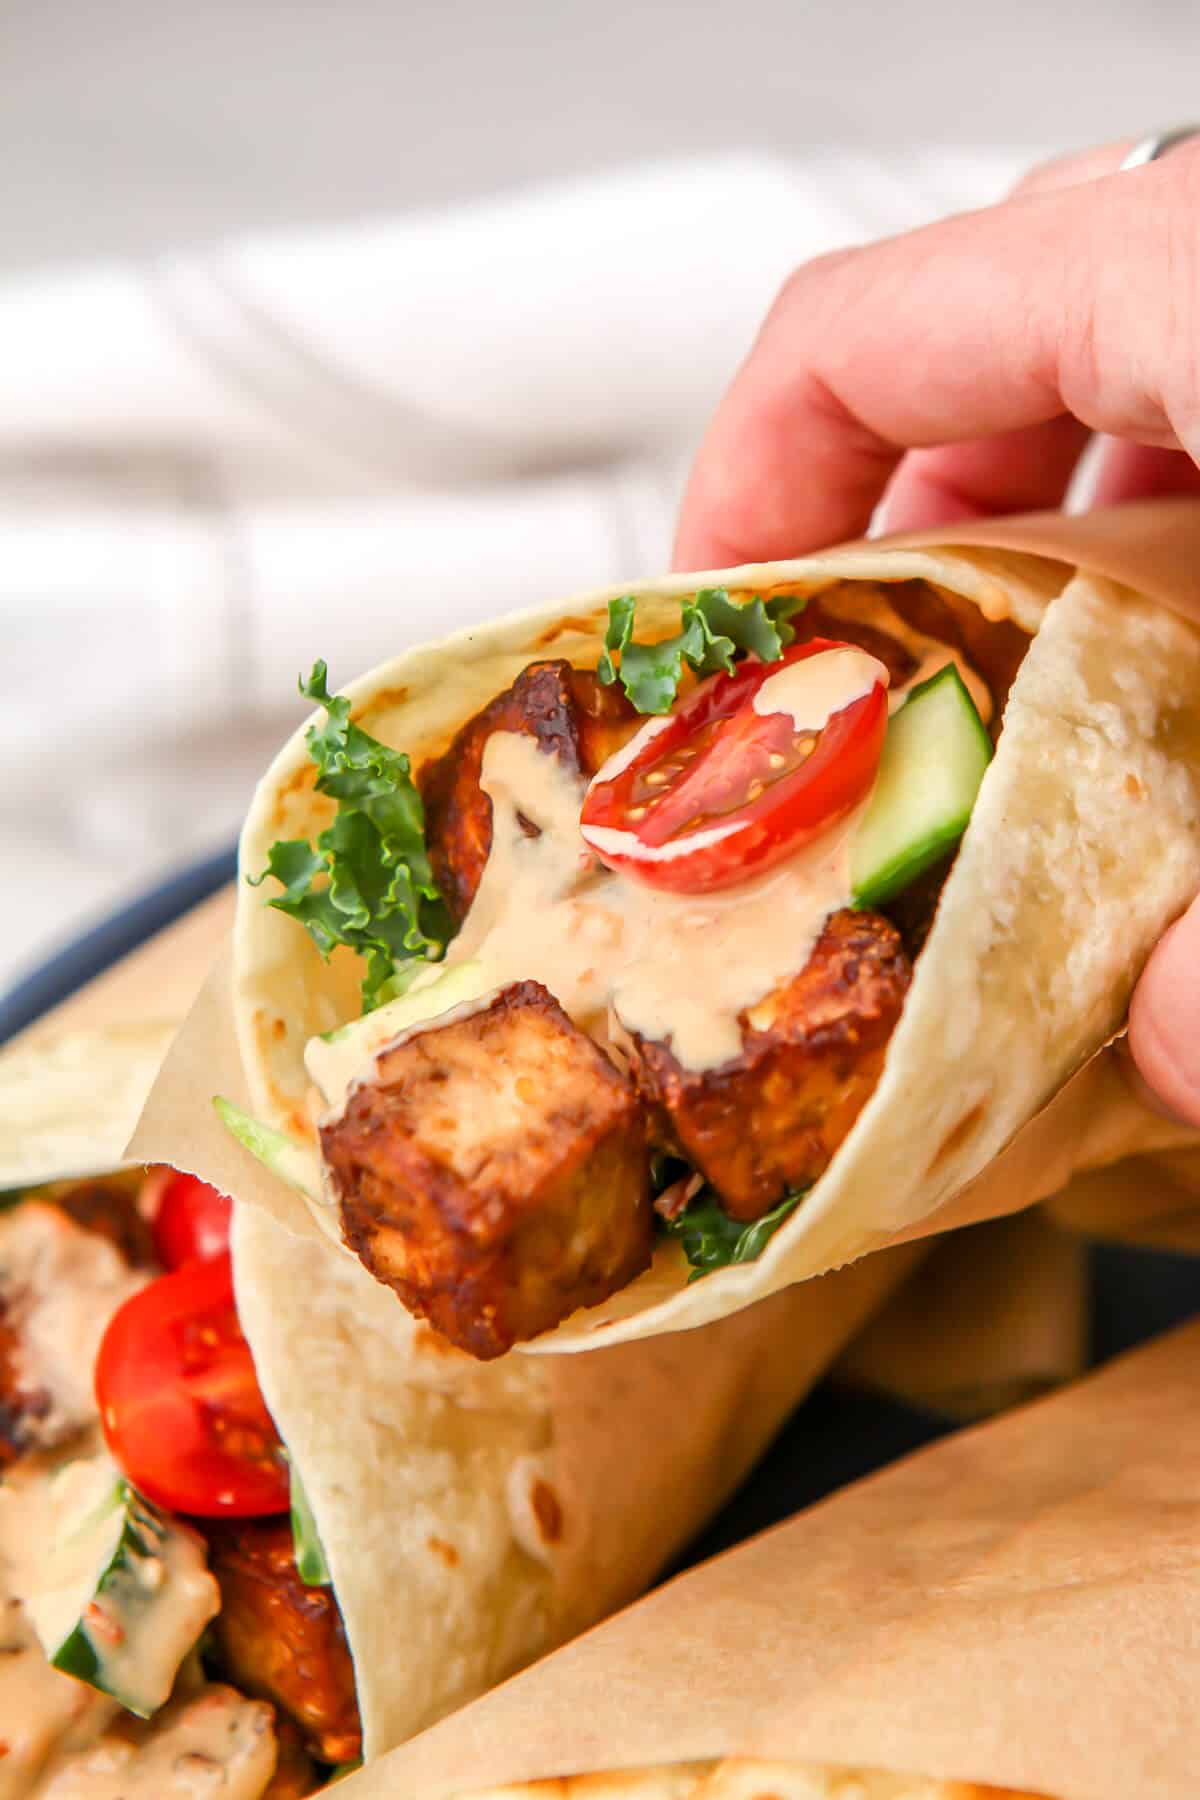 Someone holding a tofu wrap with veggies and sauce on it.